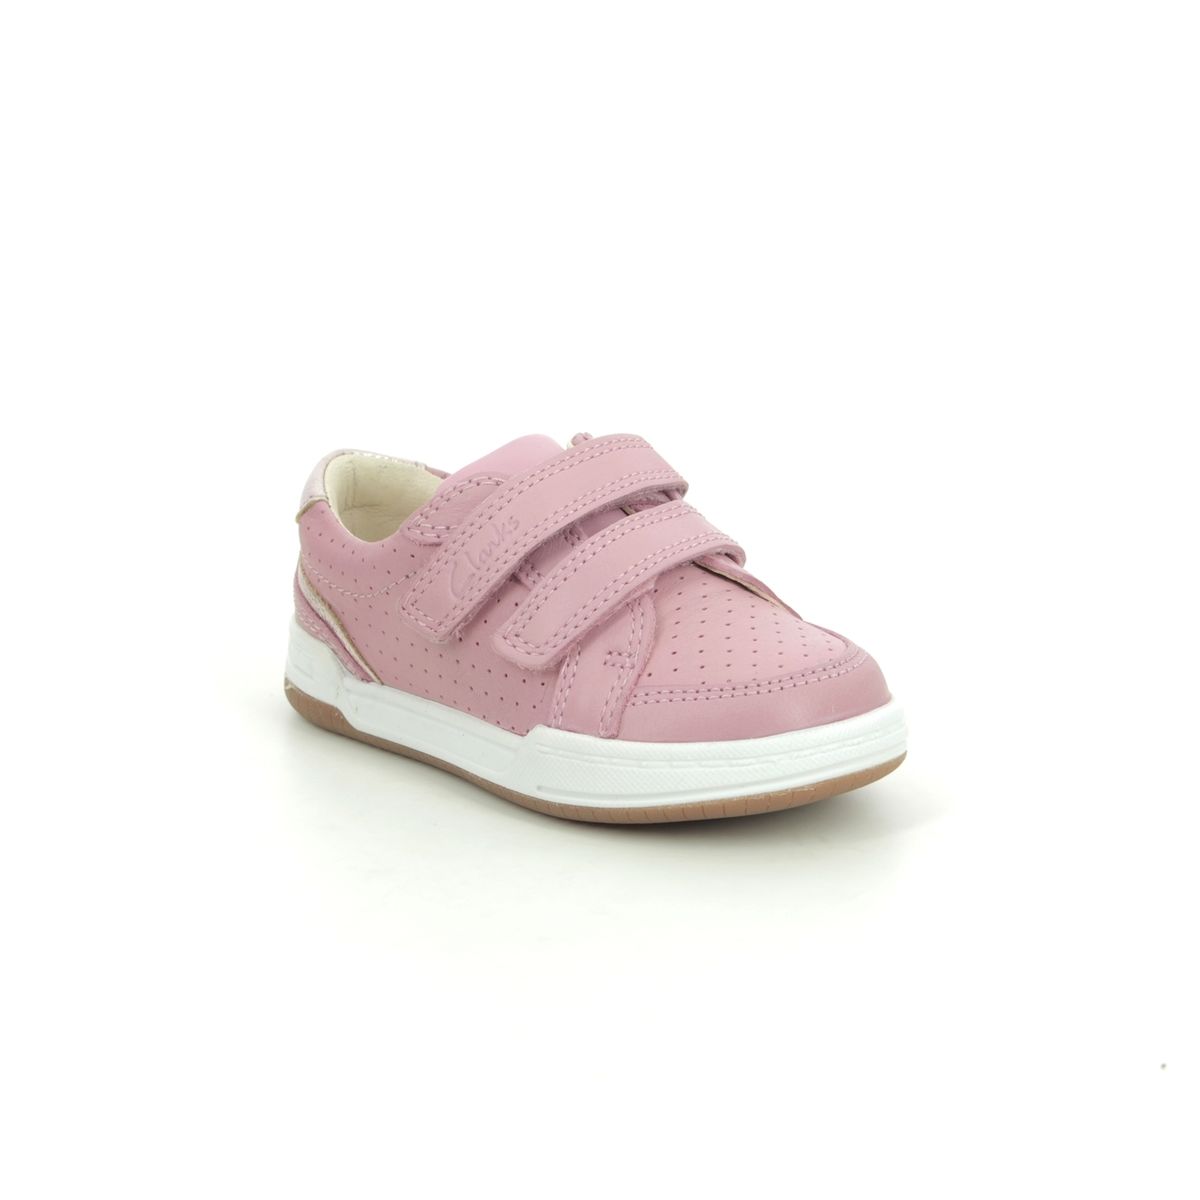 Clarks Fawn Solo T Pink Leather Kids First And Toddler 589895E In Size 7.5 In Plain Pink Leather E Width Fitting Narrow Fit For kids